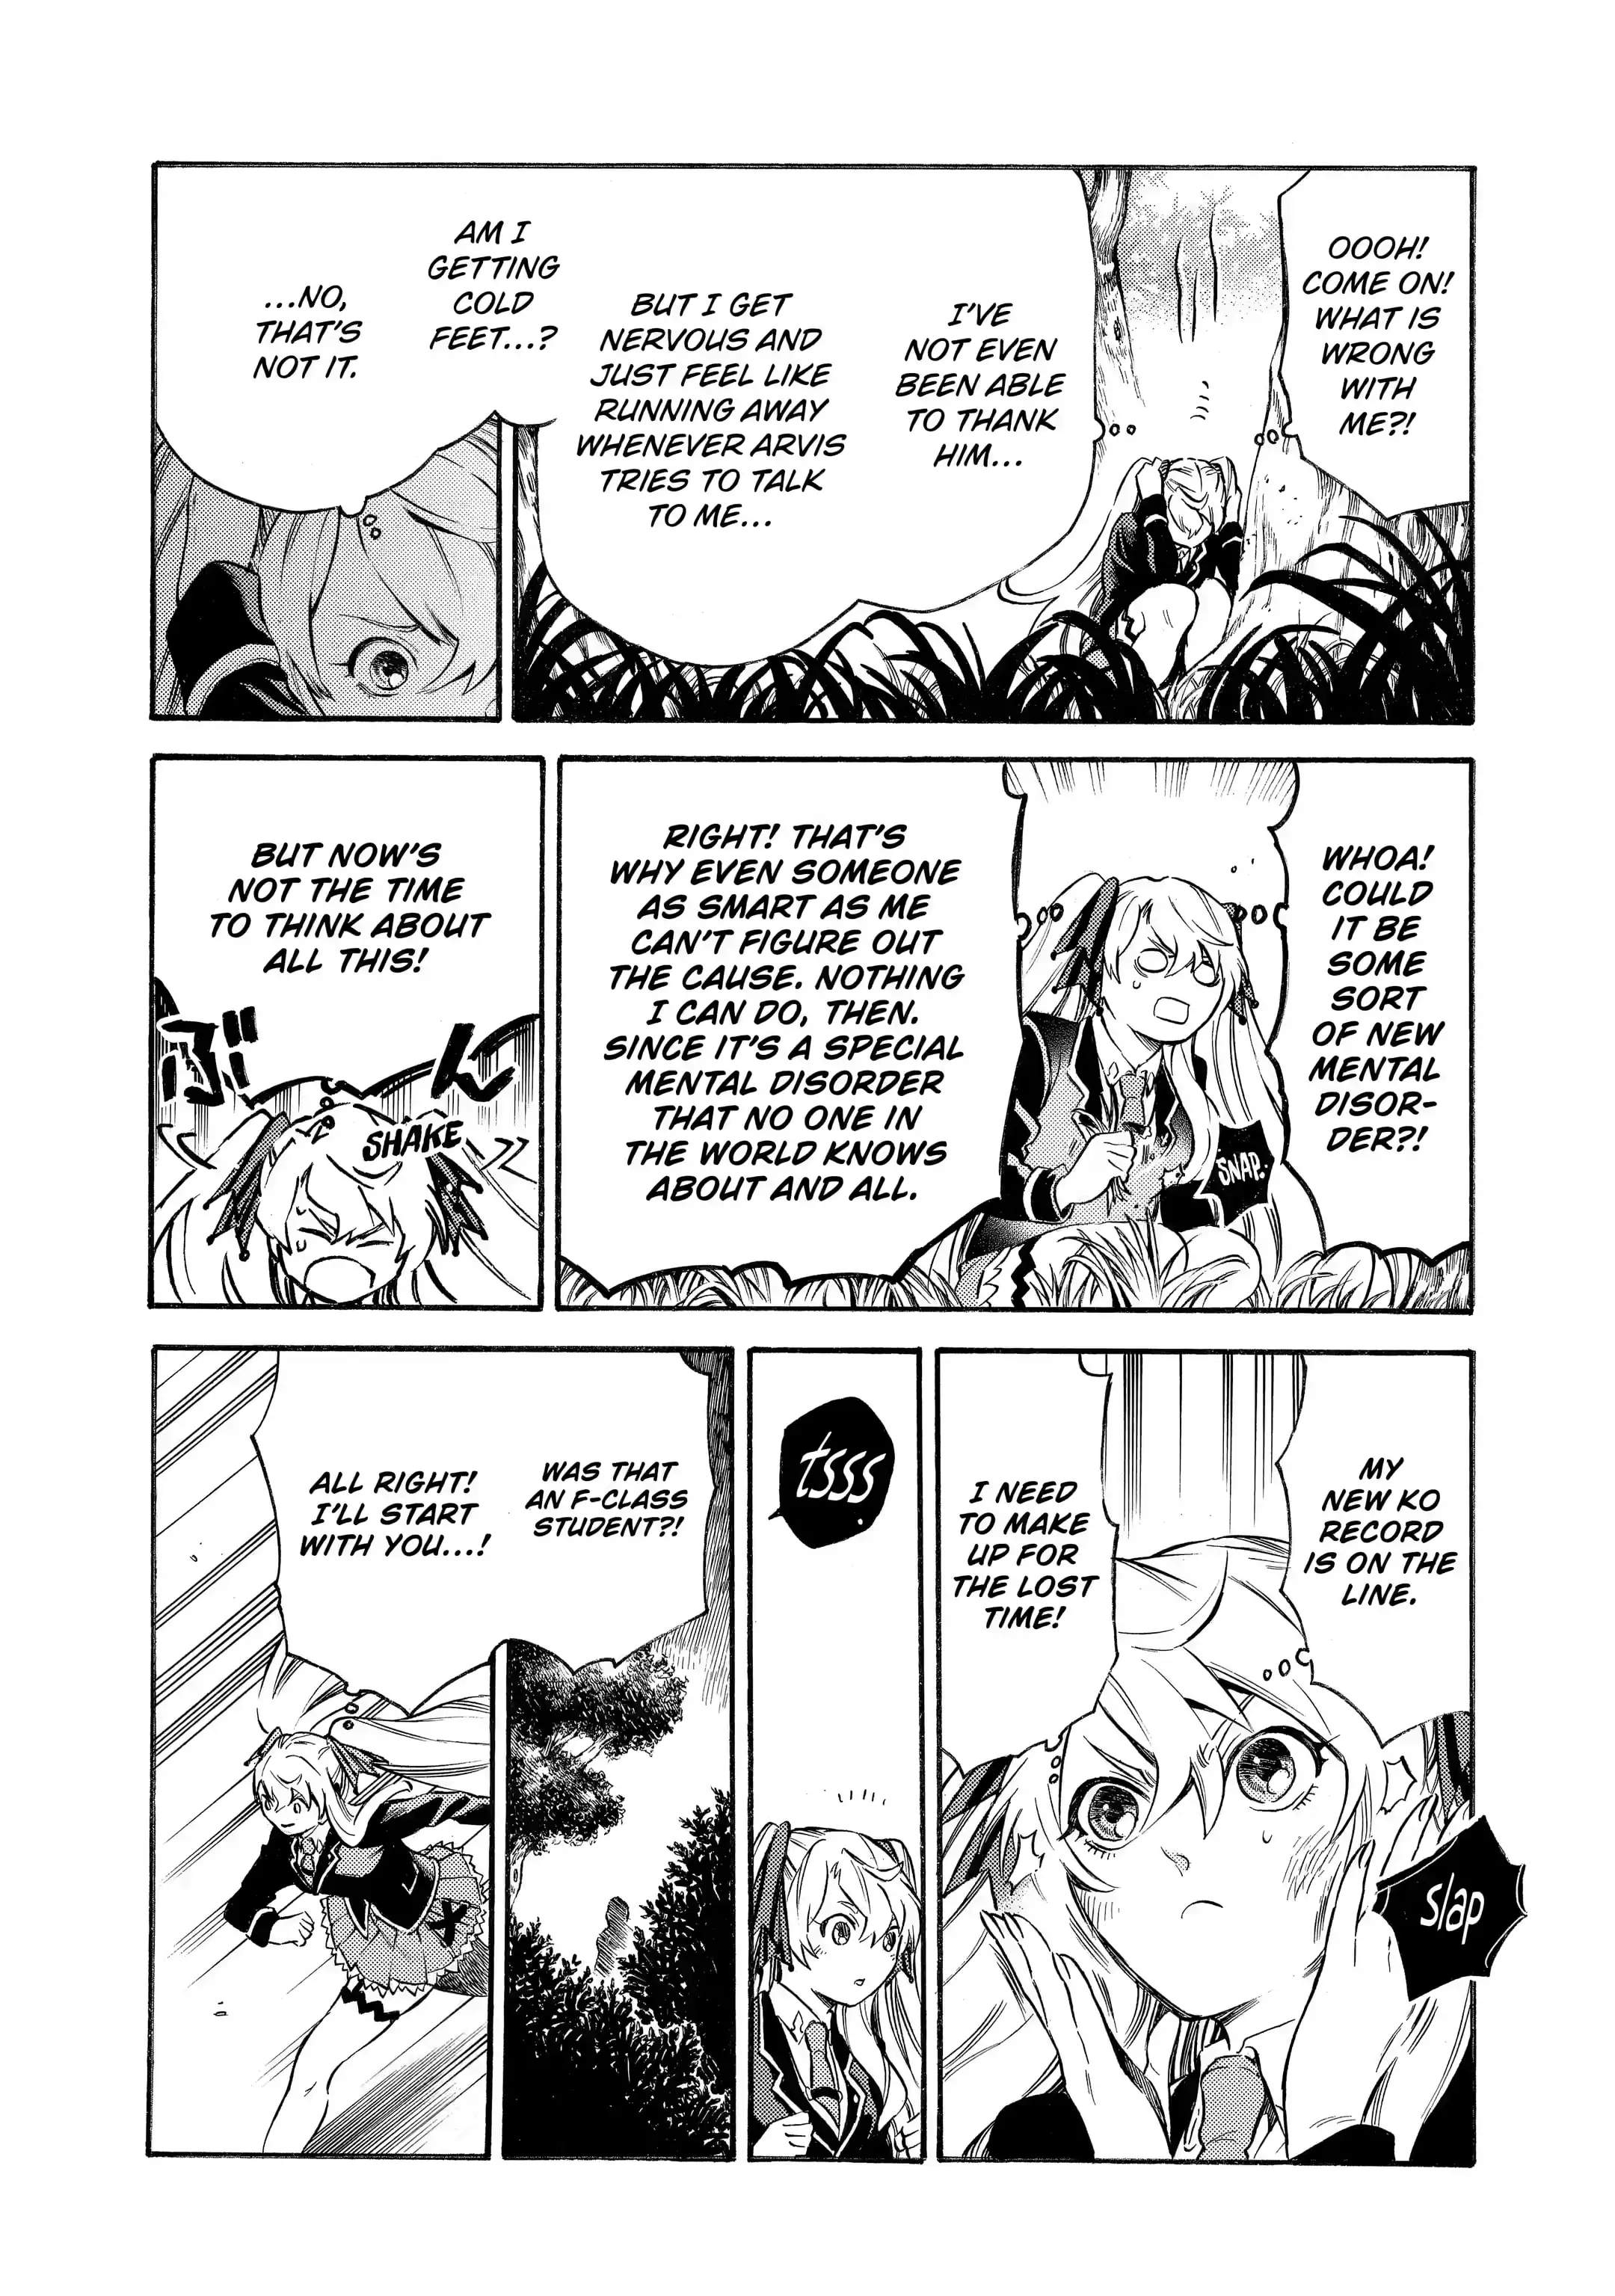 Reincarnation of the Unrivalled Time Mage: The Underachiever at the Magic Academy Turns Out to Be the Strongest Mage Who Controls Time! Chapter 6.3-eng-li - Page 7